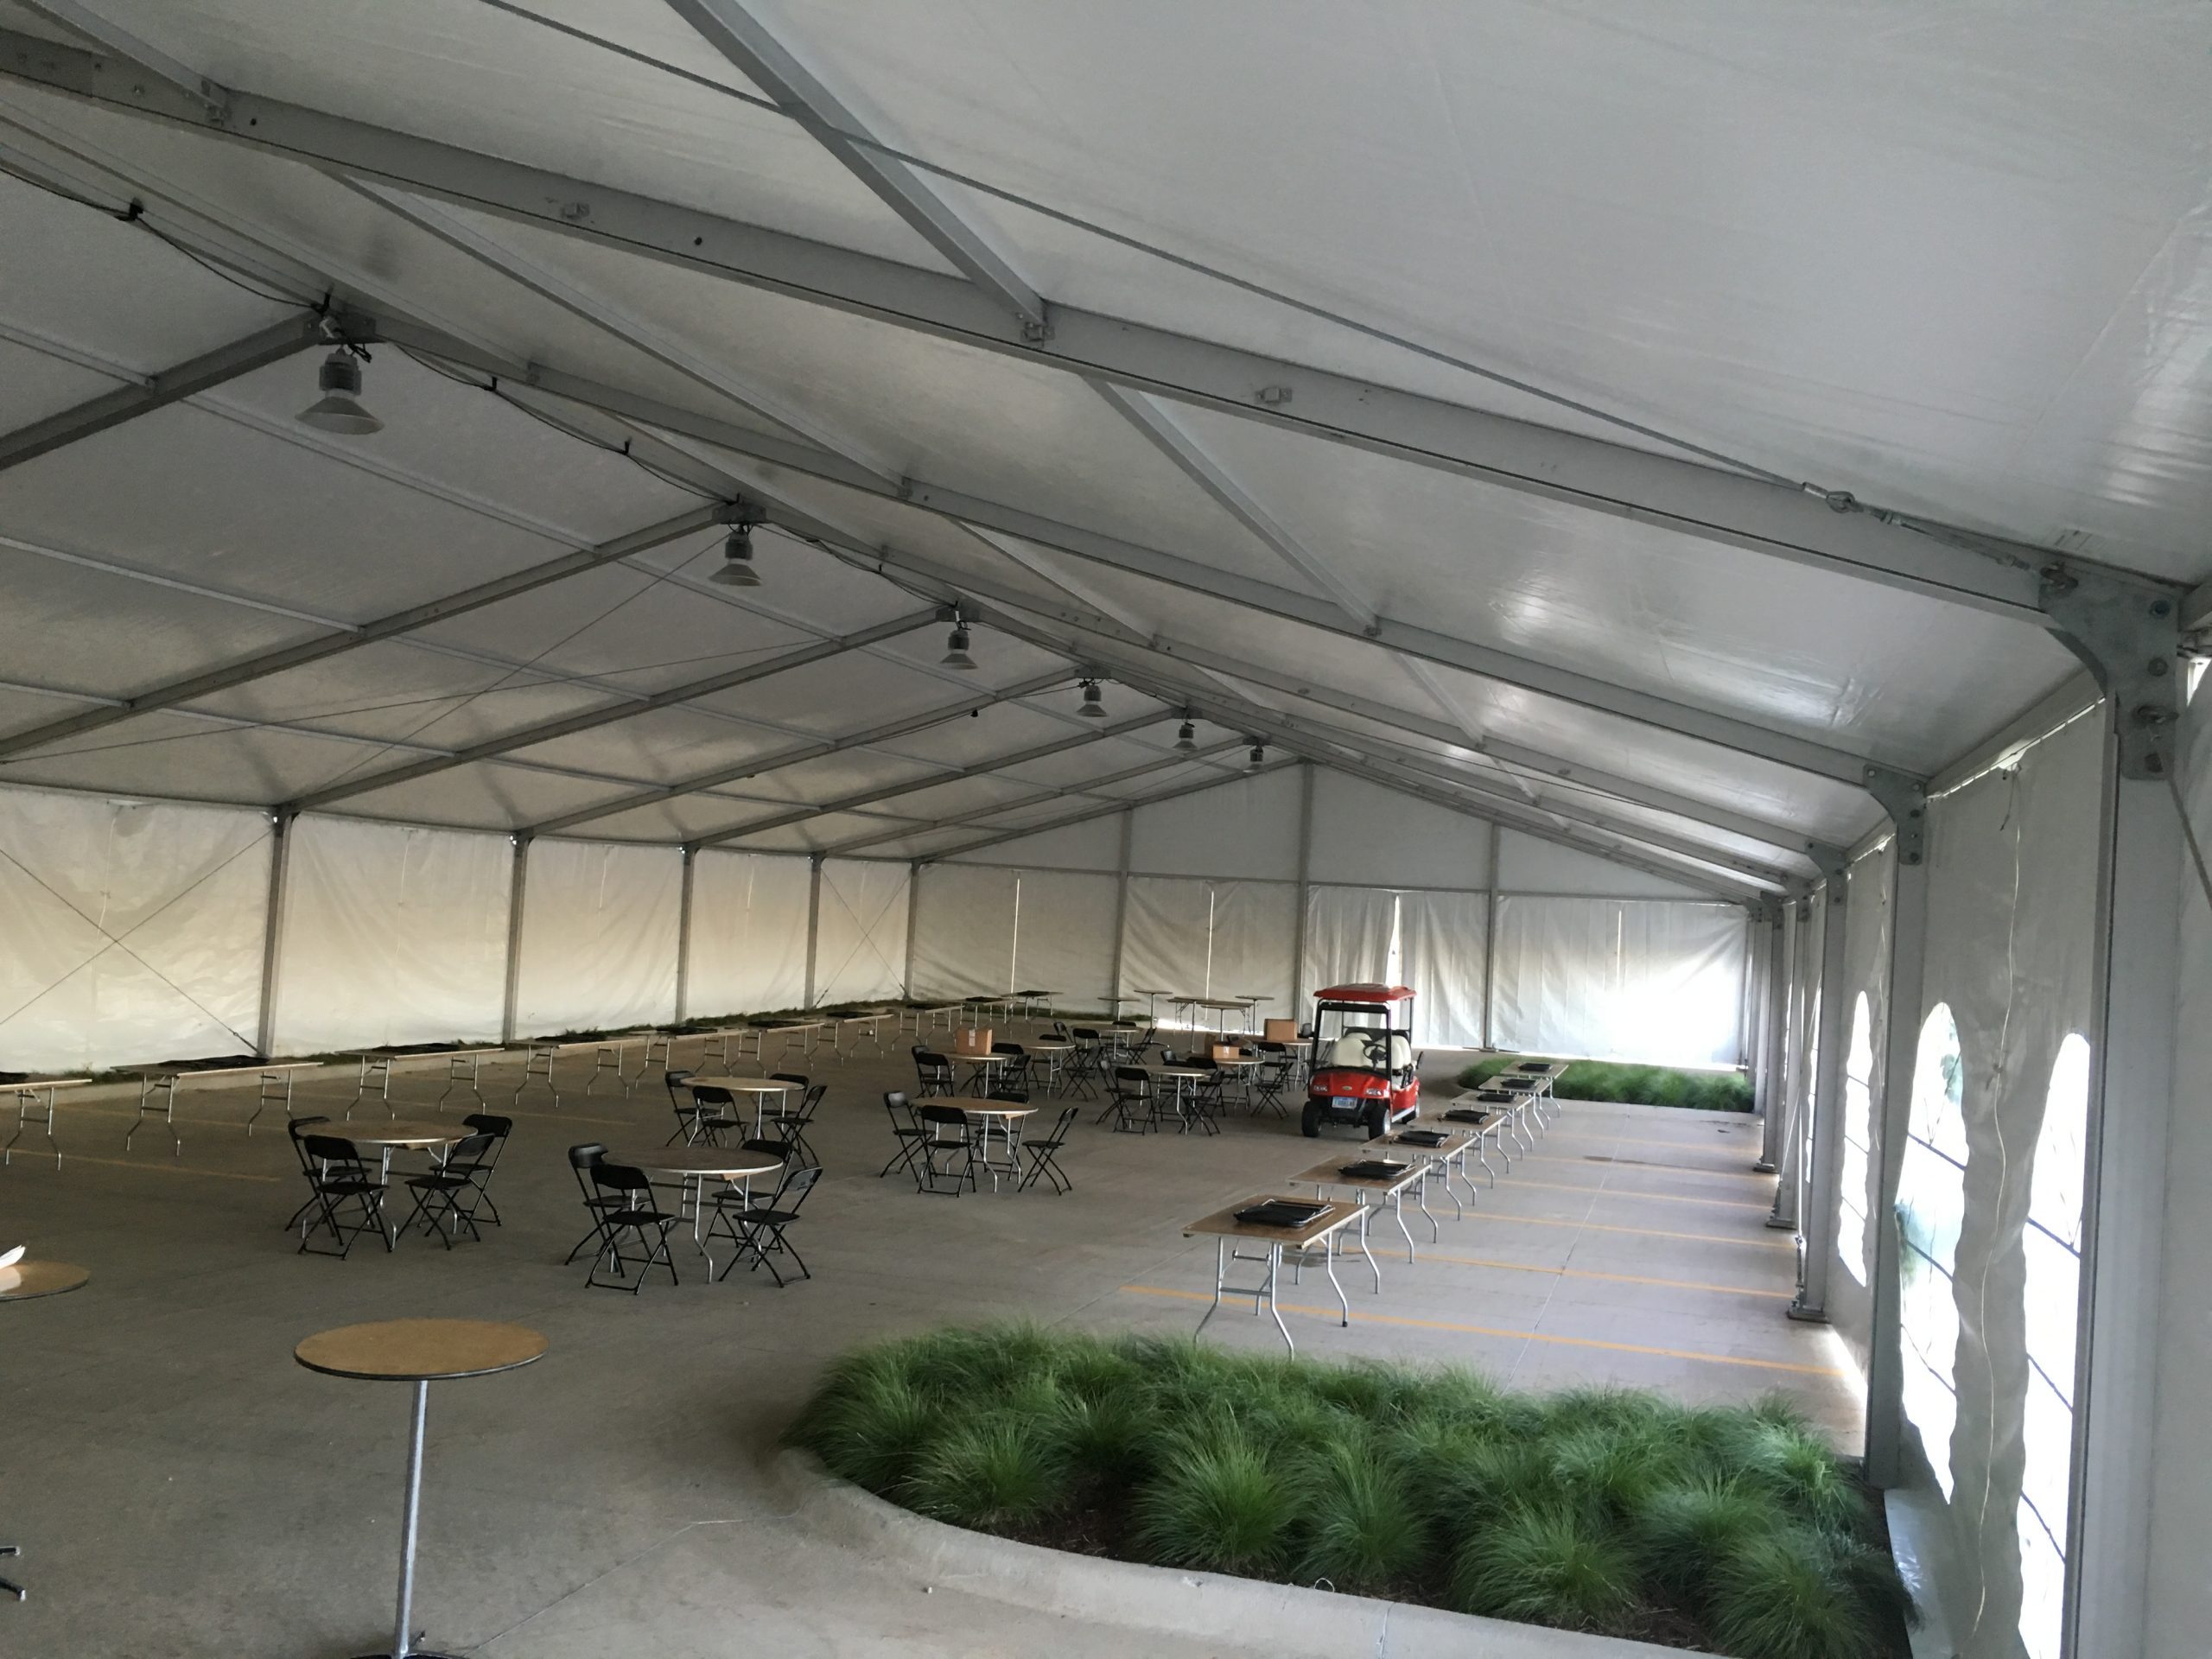 Inside the 60' x 131' Clearspan tent for the grand opening event of Brownells location in Grinnell, Iowa with French and regular sidewalls